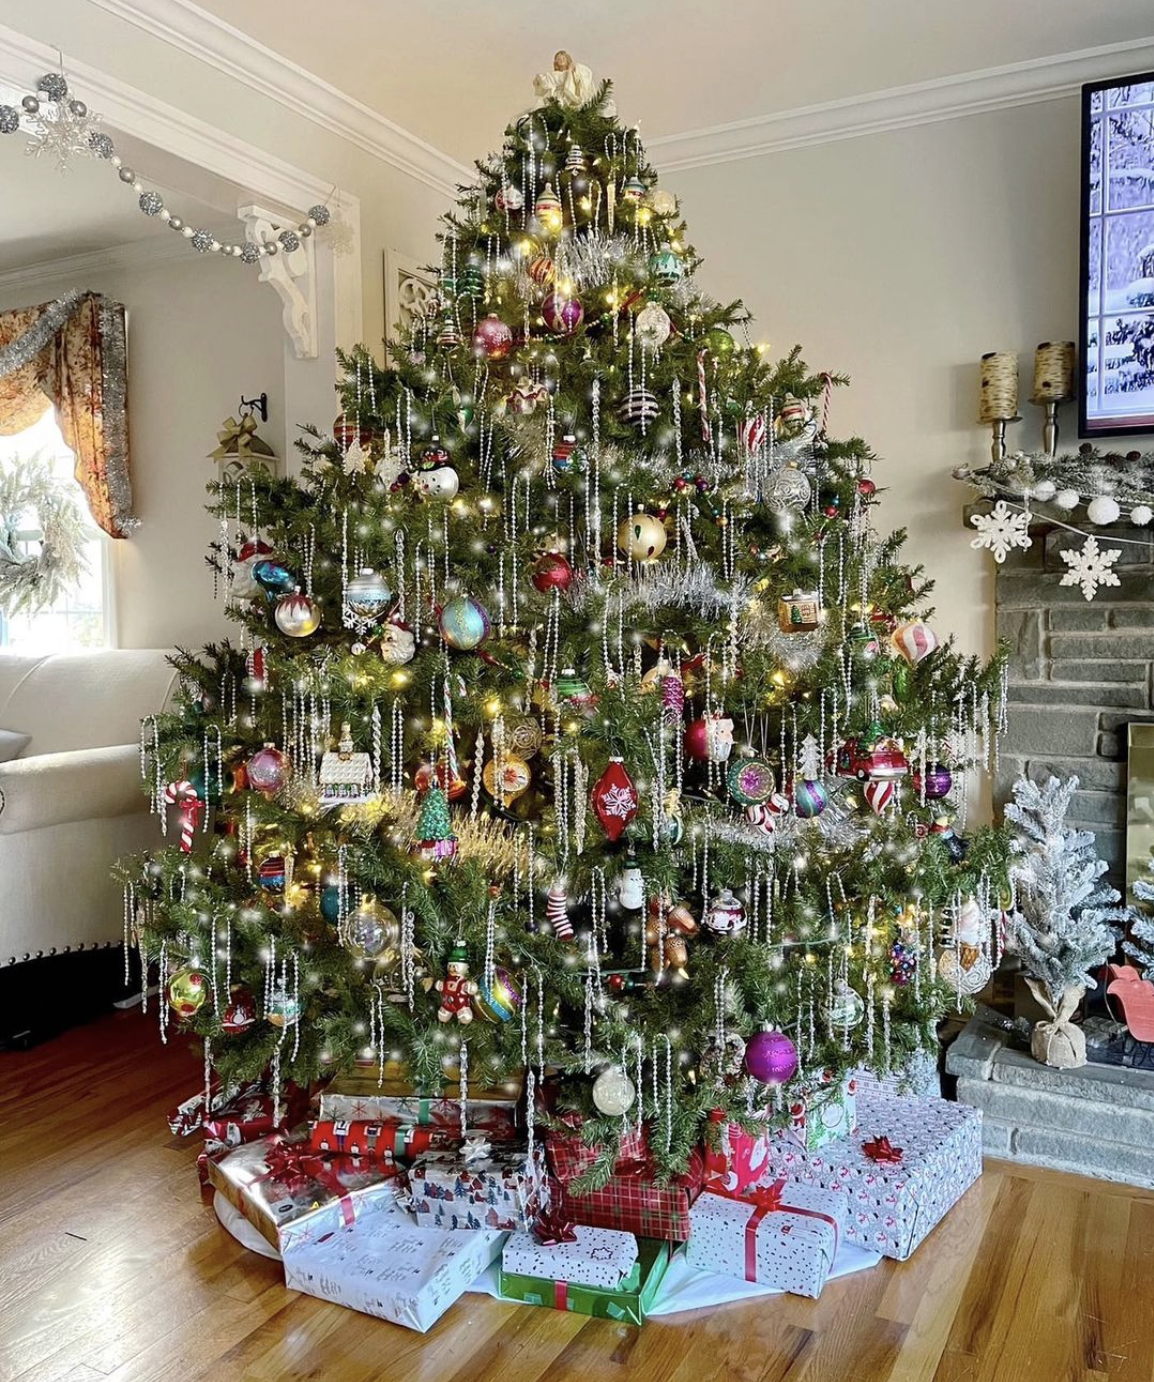 Tinsel inspired Christmas Tree - love that she used garland to mimic the look of tinsel!